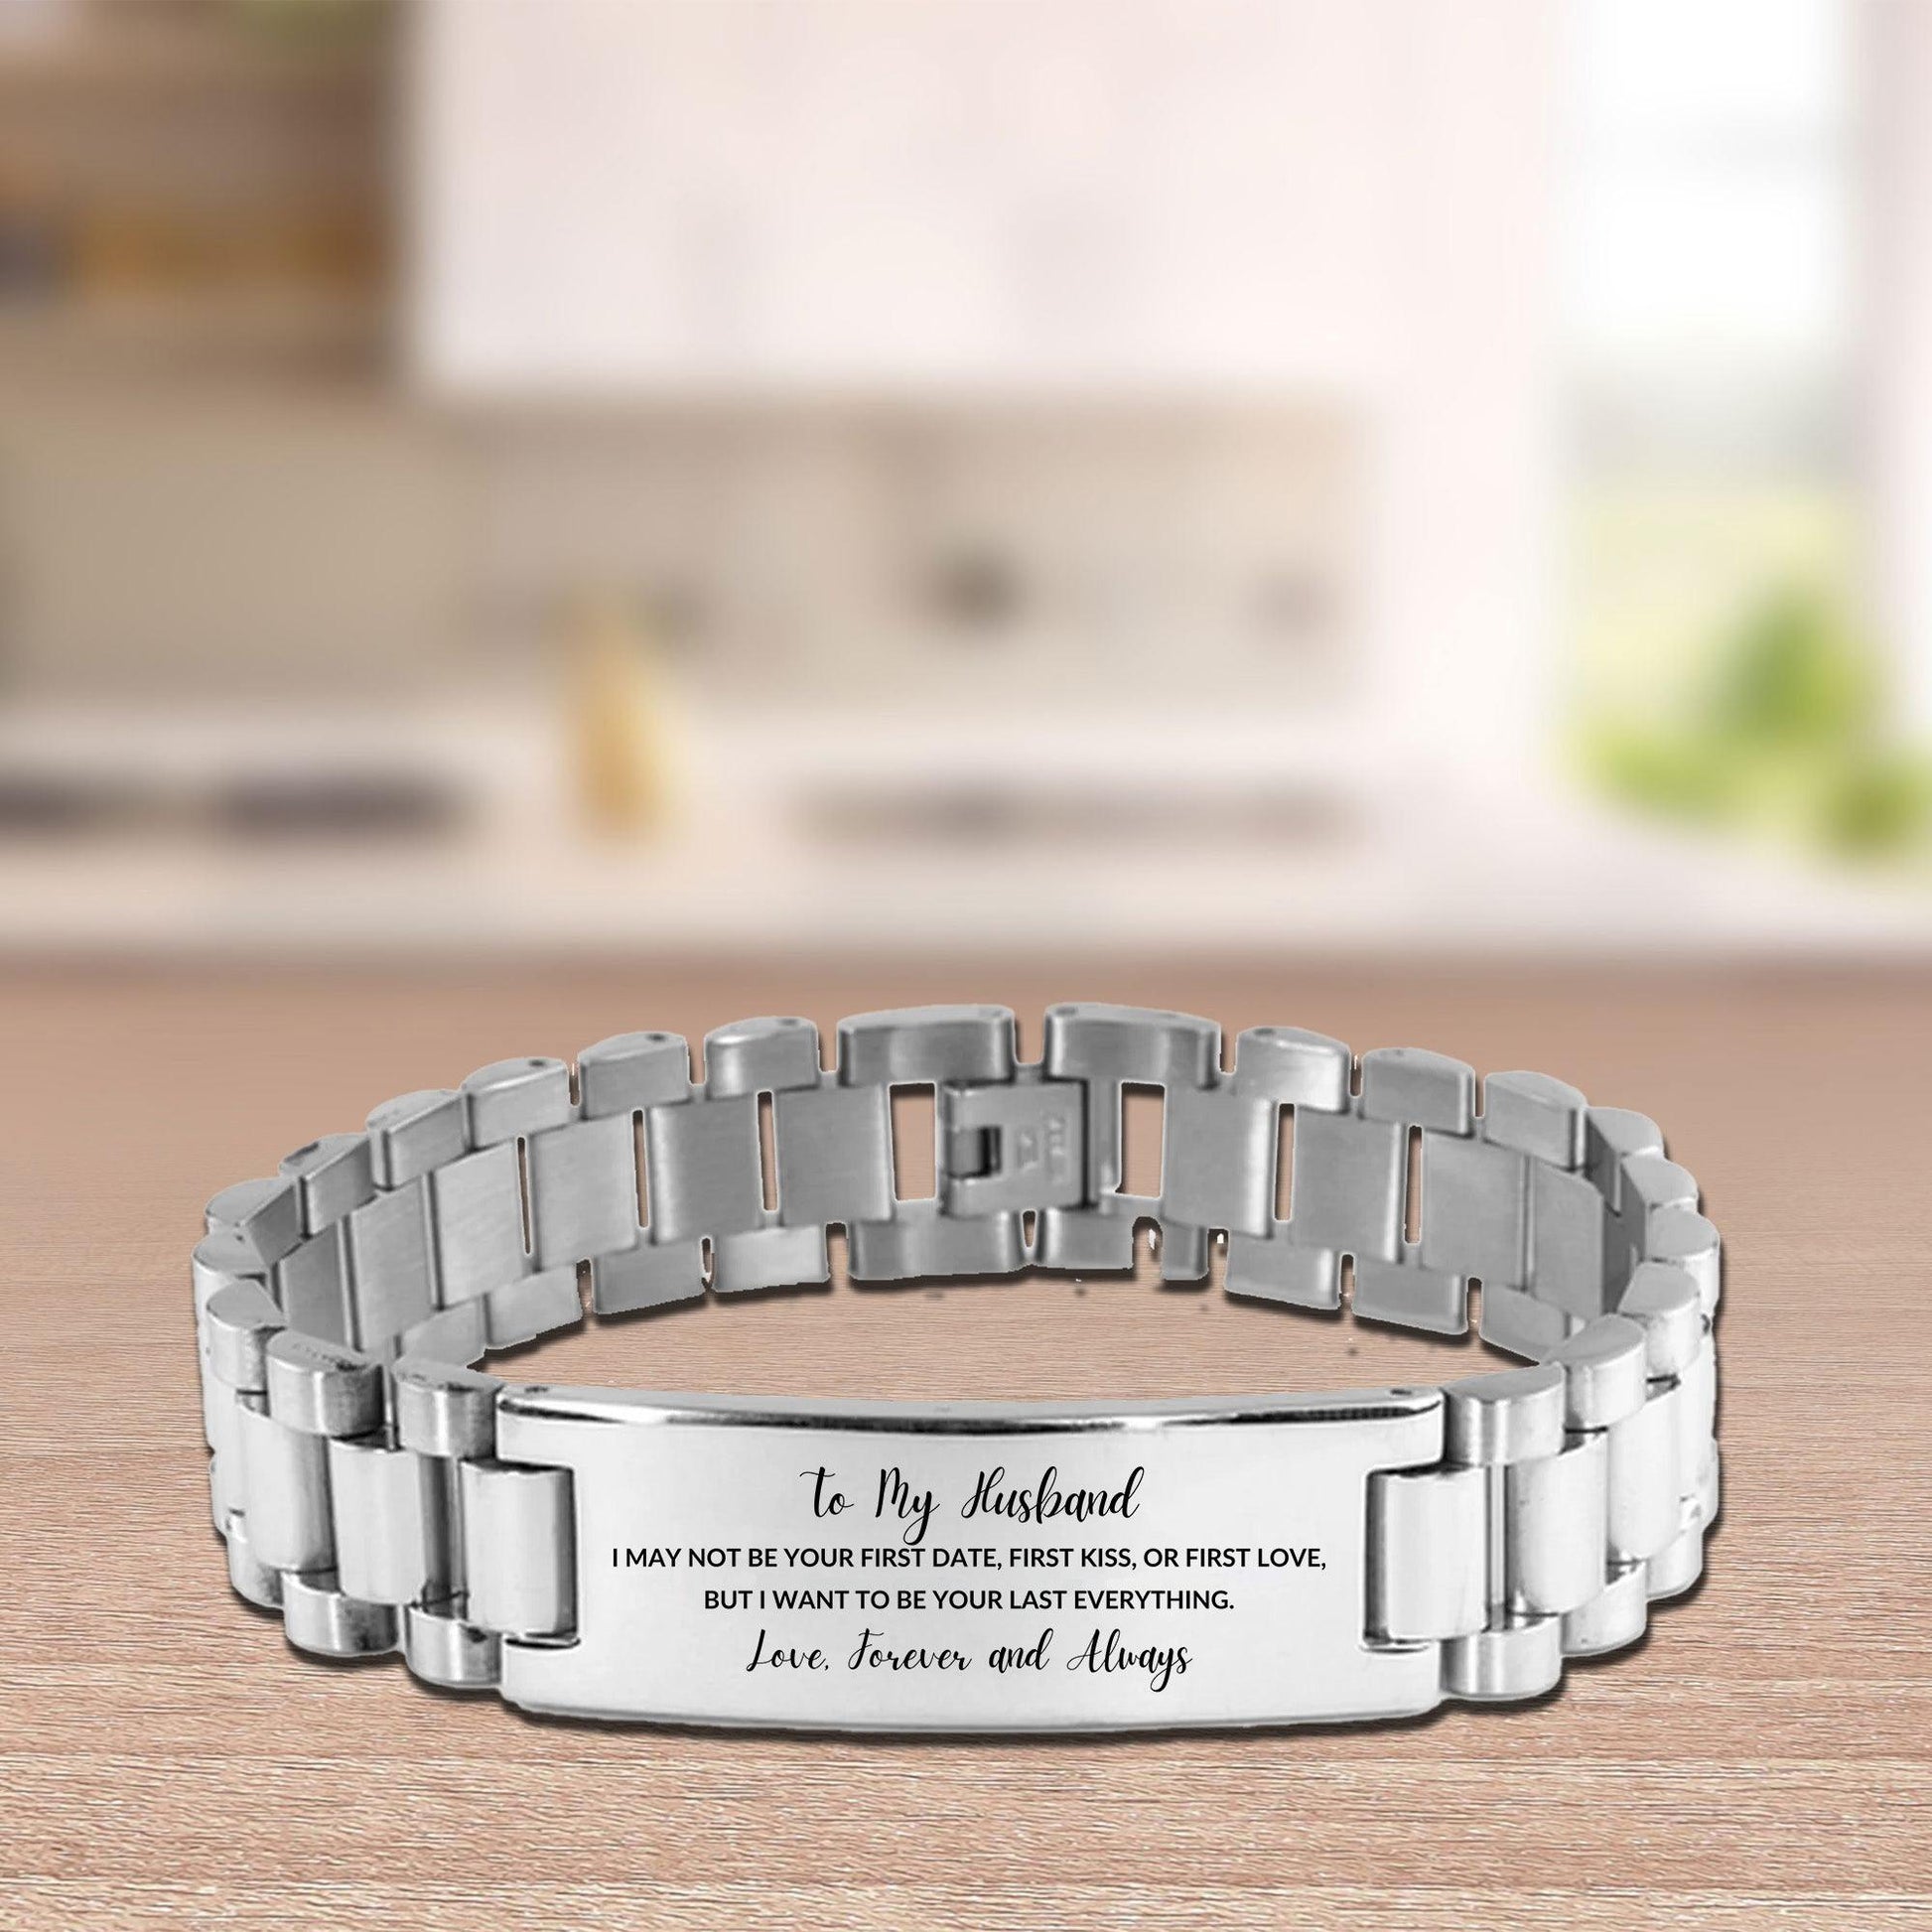 To My Husband I Want to Be Your Last Everything Engraved Ladder Stainless Steel Bracelet Romantic Valentine Gift - Mallard Moon Gift Shop